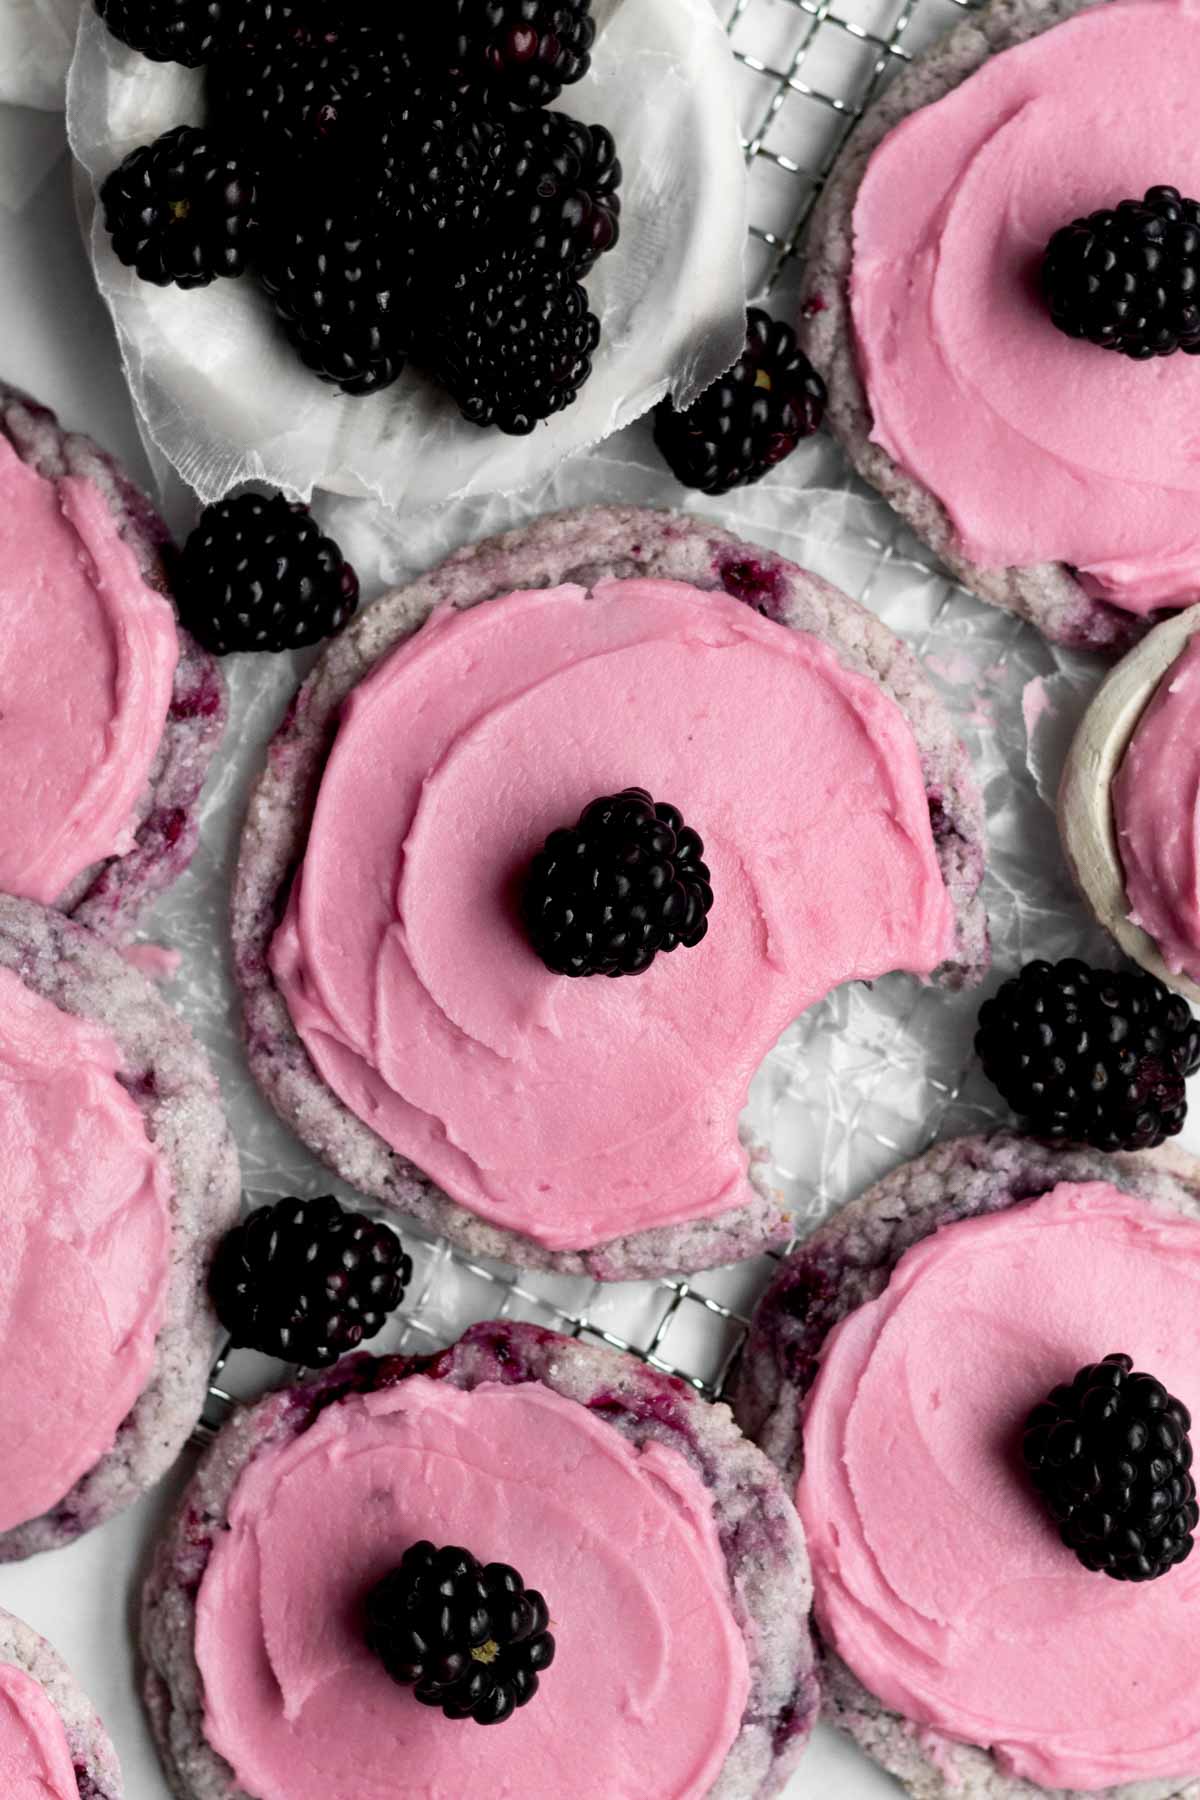 Blackberry Cookies with sweet blackberry frosting with extra fresh blackberries strewn amongst them on wax paper.